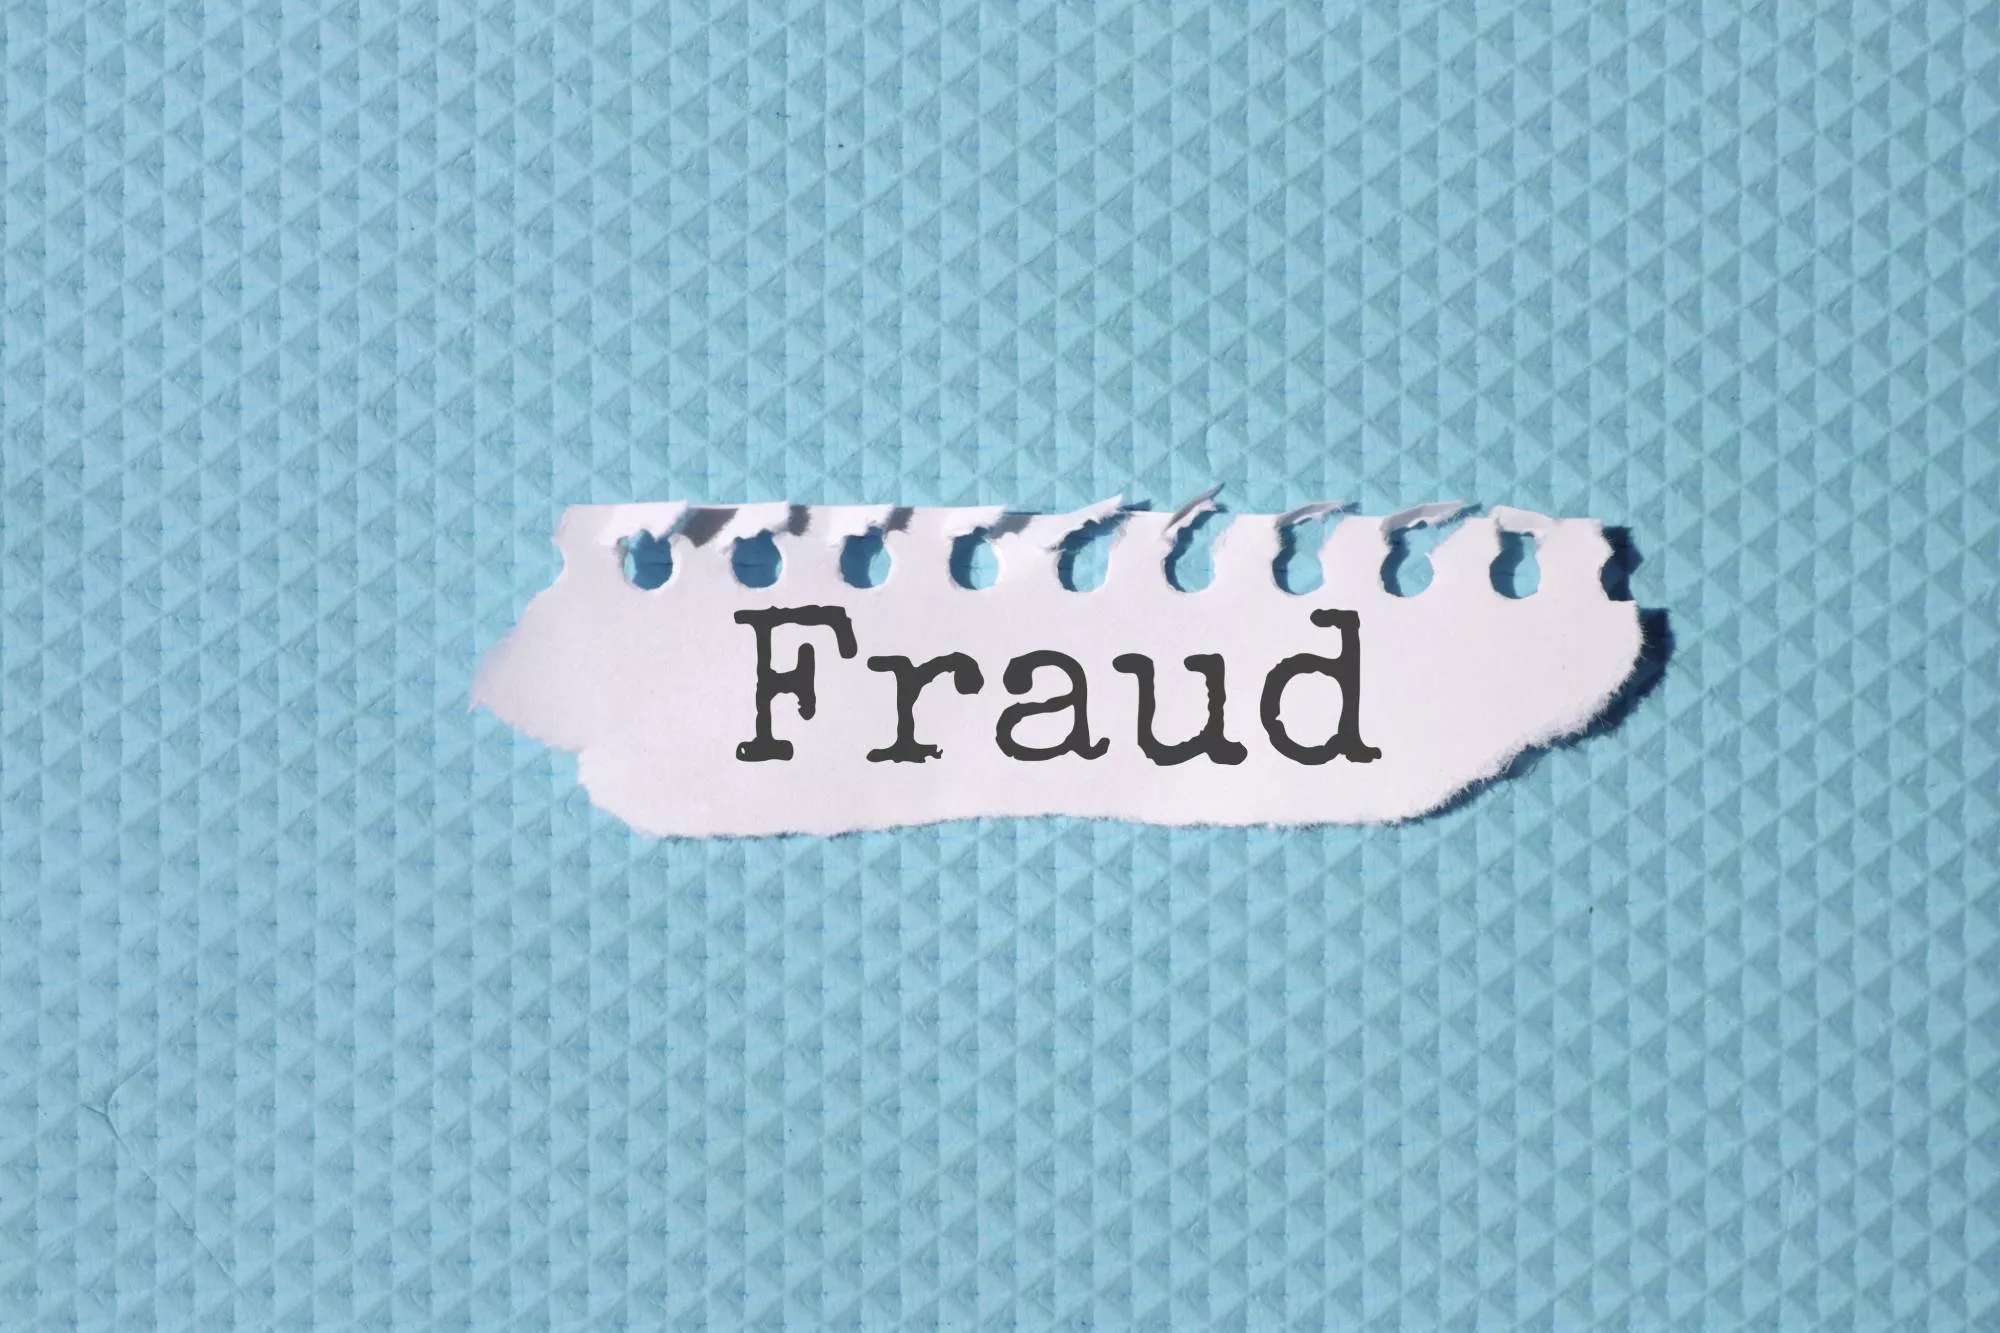 a torn paper on a blue background that has fraud on it to represent a fake check